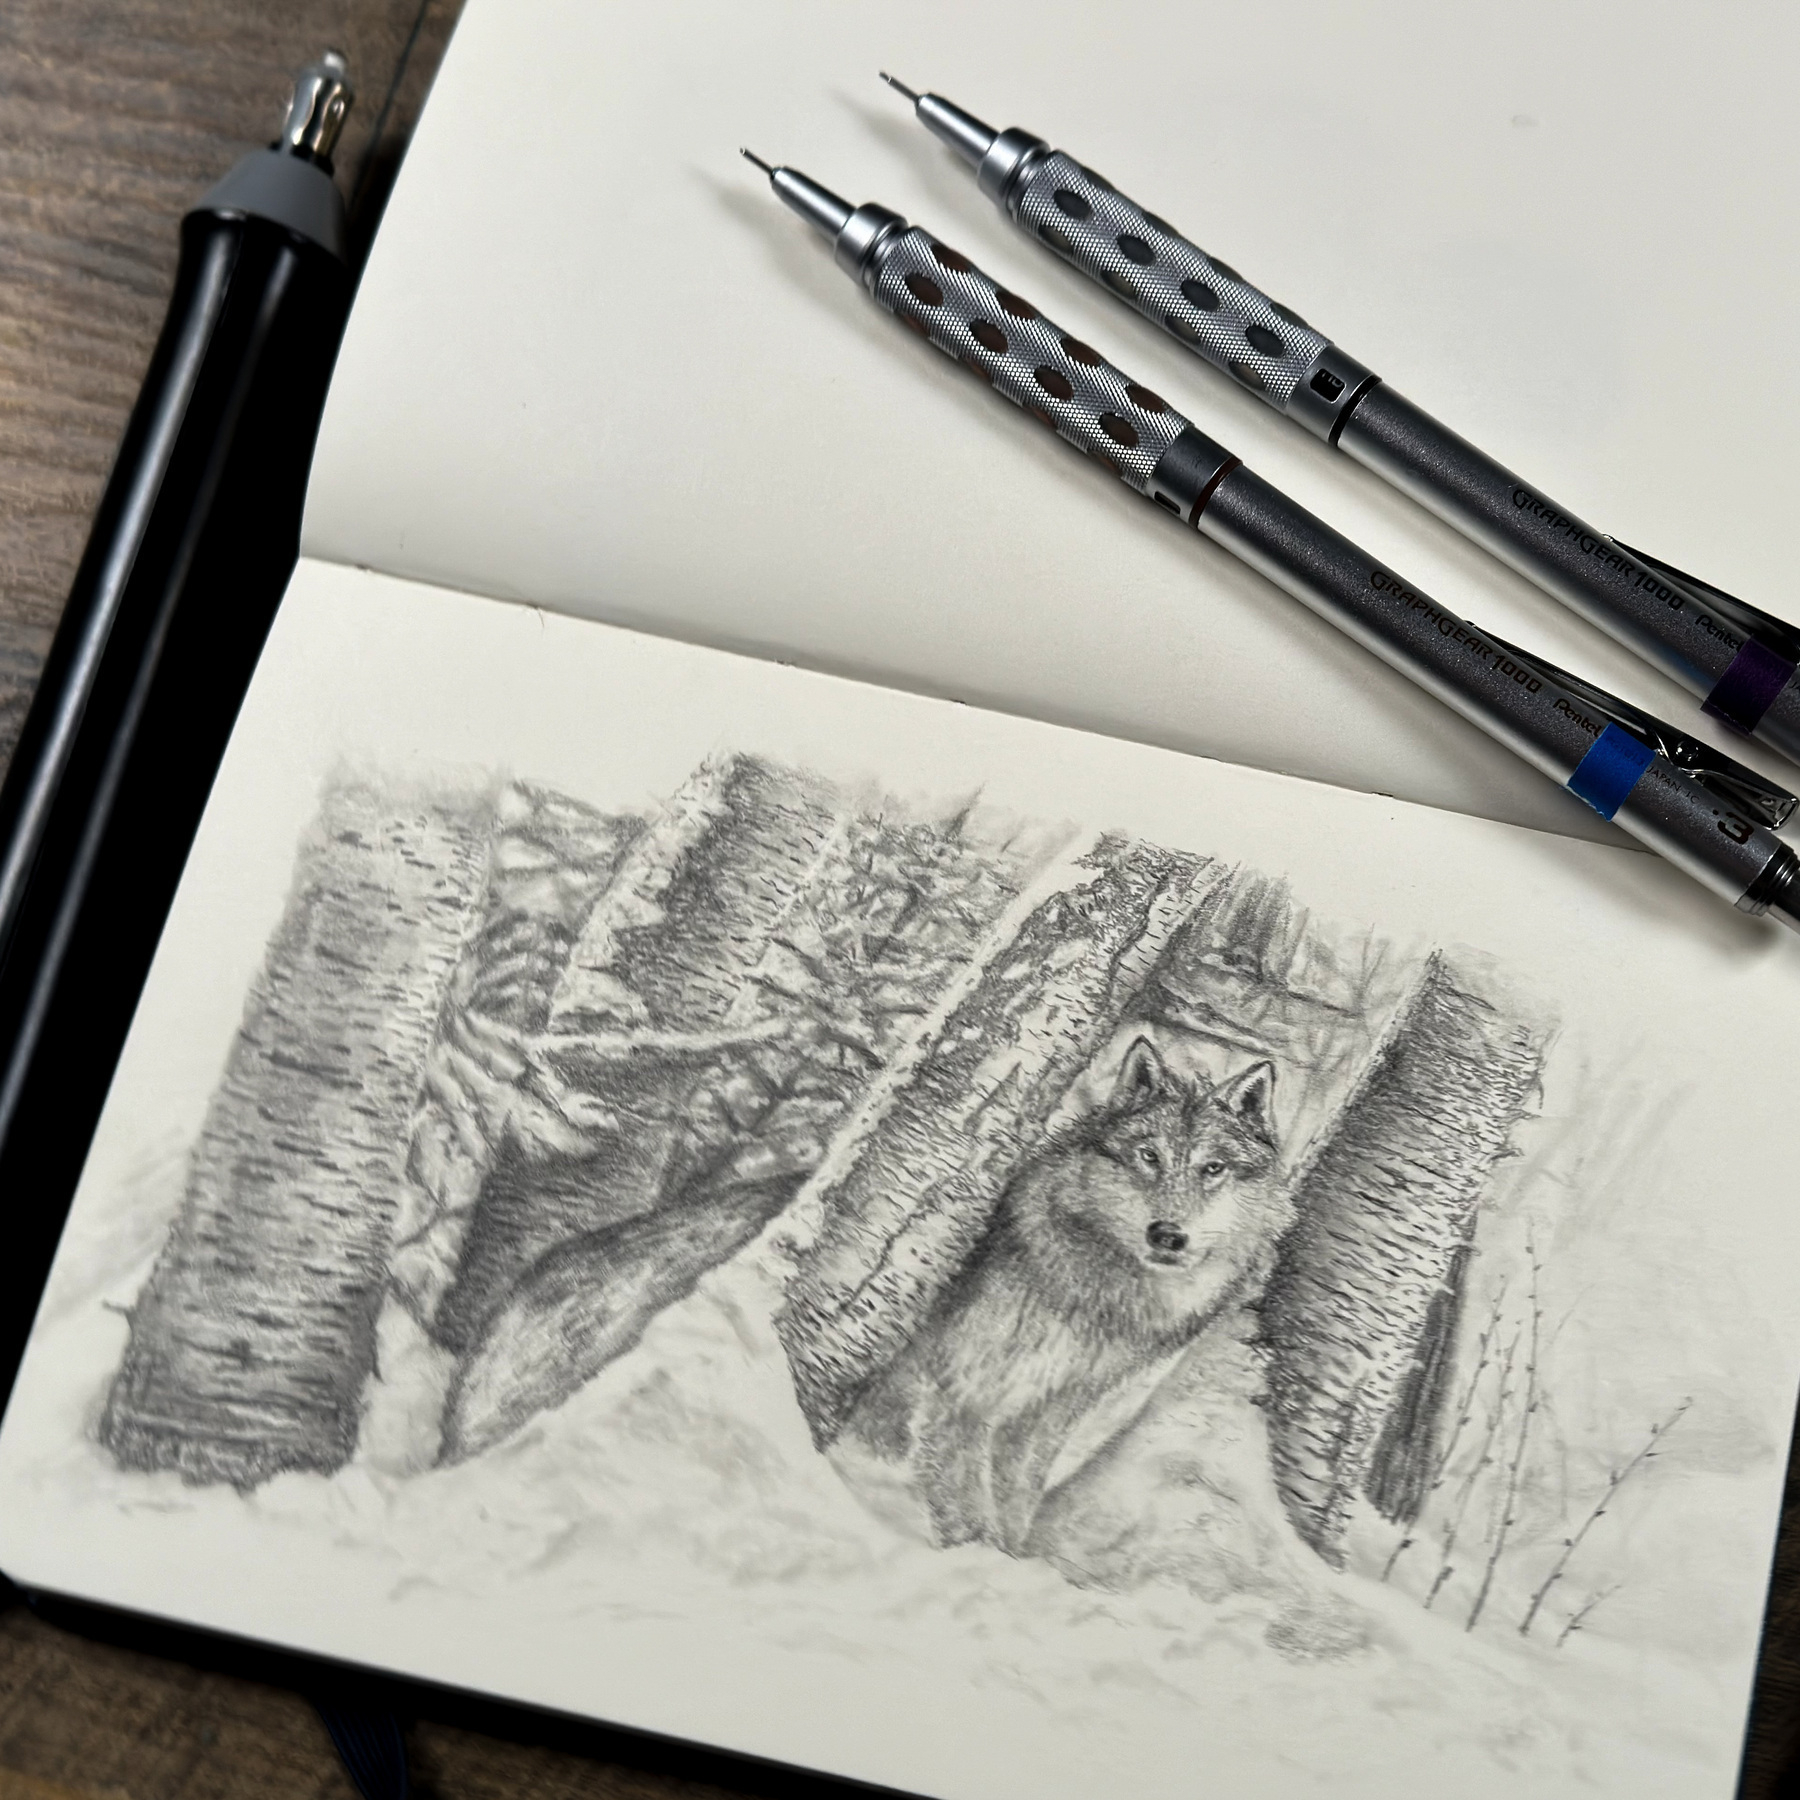 A pencil sketch of a wolf in a forest, placed on a wooden table surrounded by drawing tools including a mechanical pencil, two blenders, an electric eraser, and a piece of kneaded eraser.